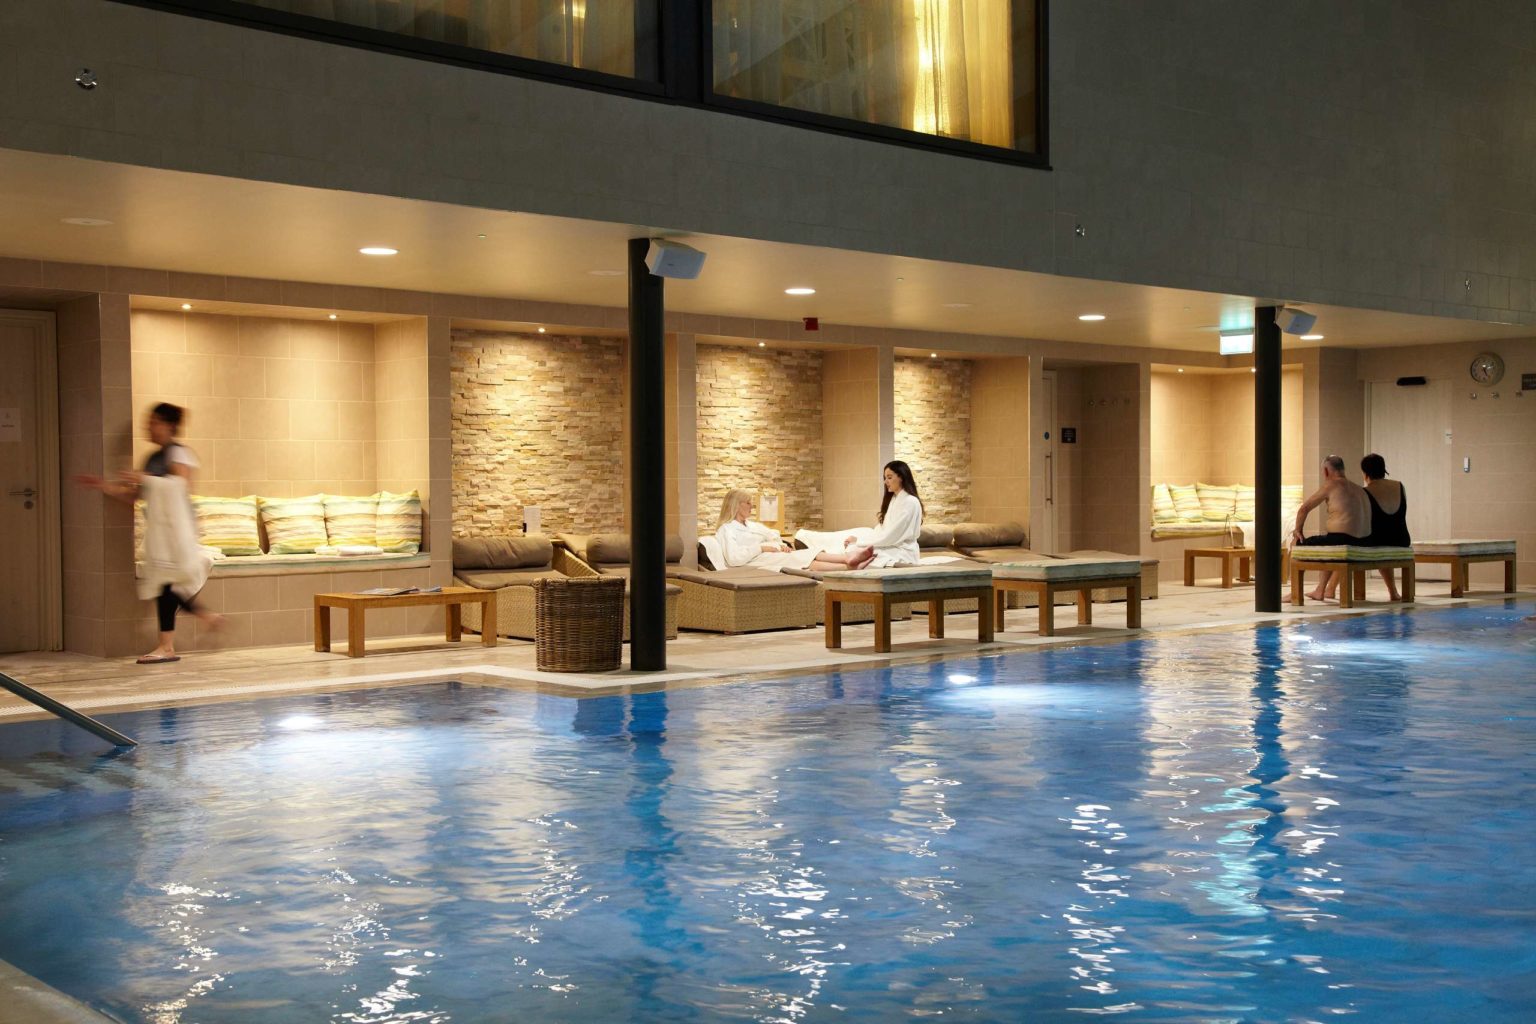 Guests relaxing next to the swimming pool during the evening at Swinton Country Club and Spa in North Yorkshire